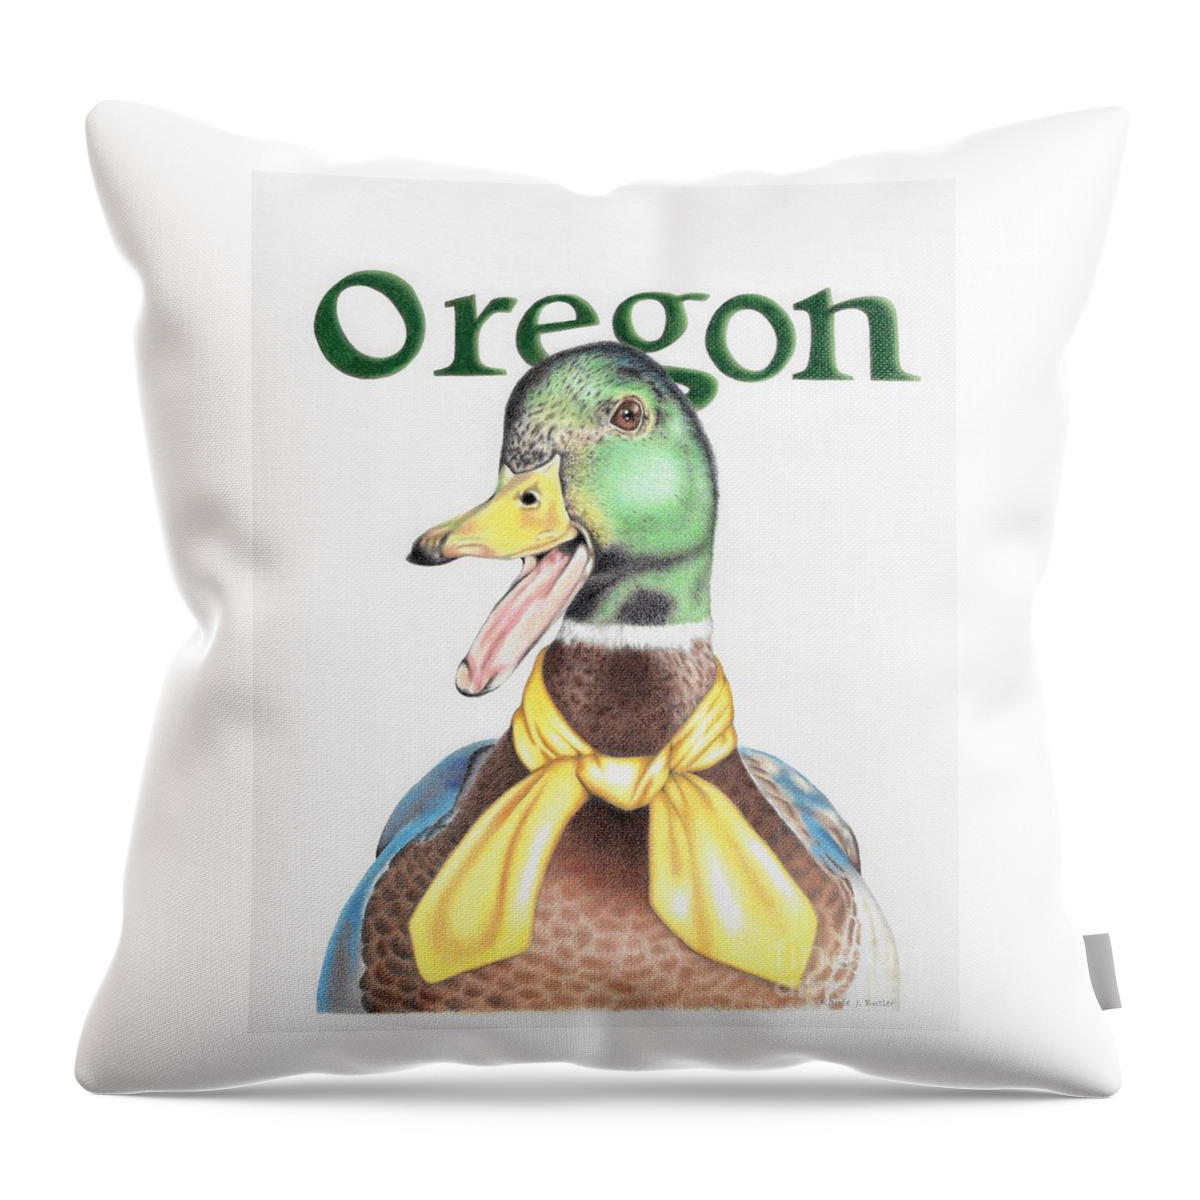 Oregon Throw Pillow featuring the drawing Oregon Duck by Karrie J Butler